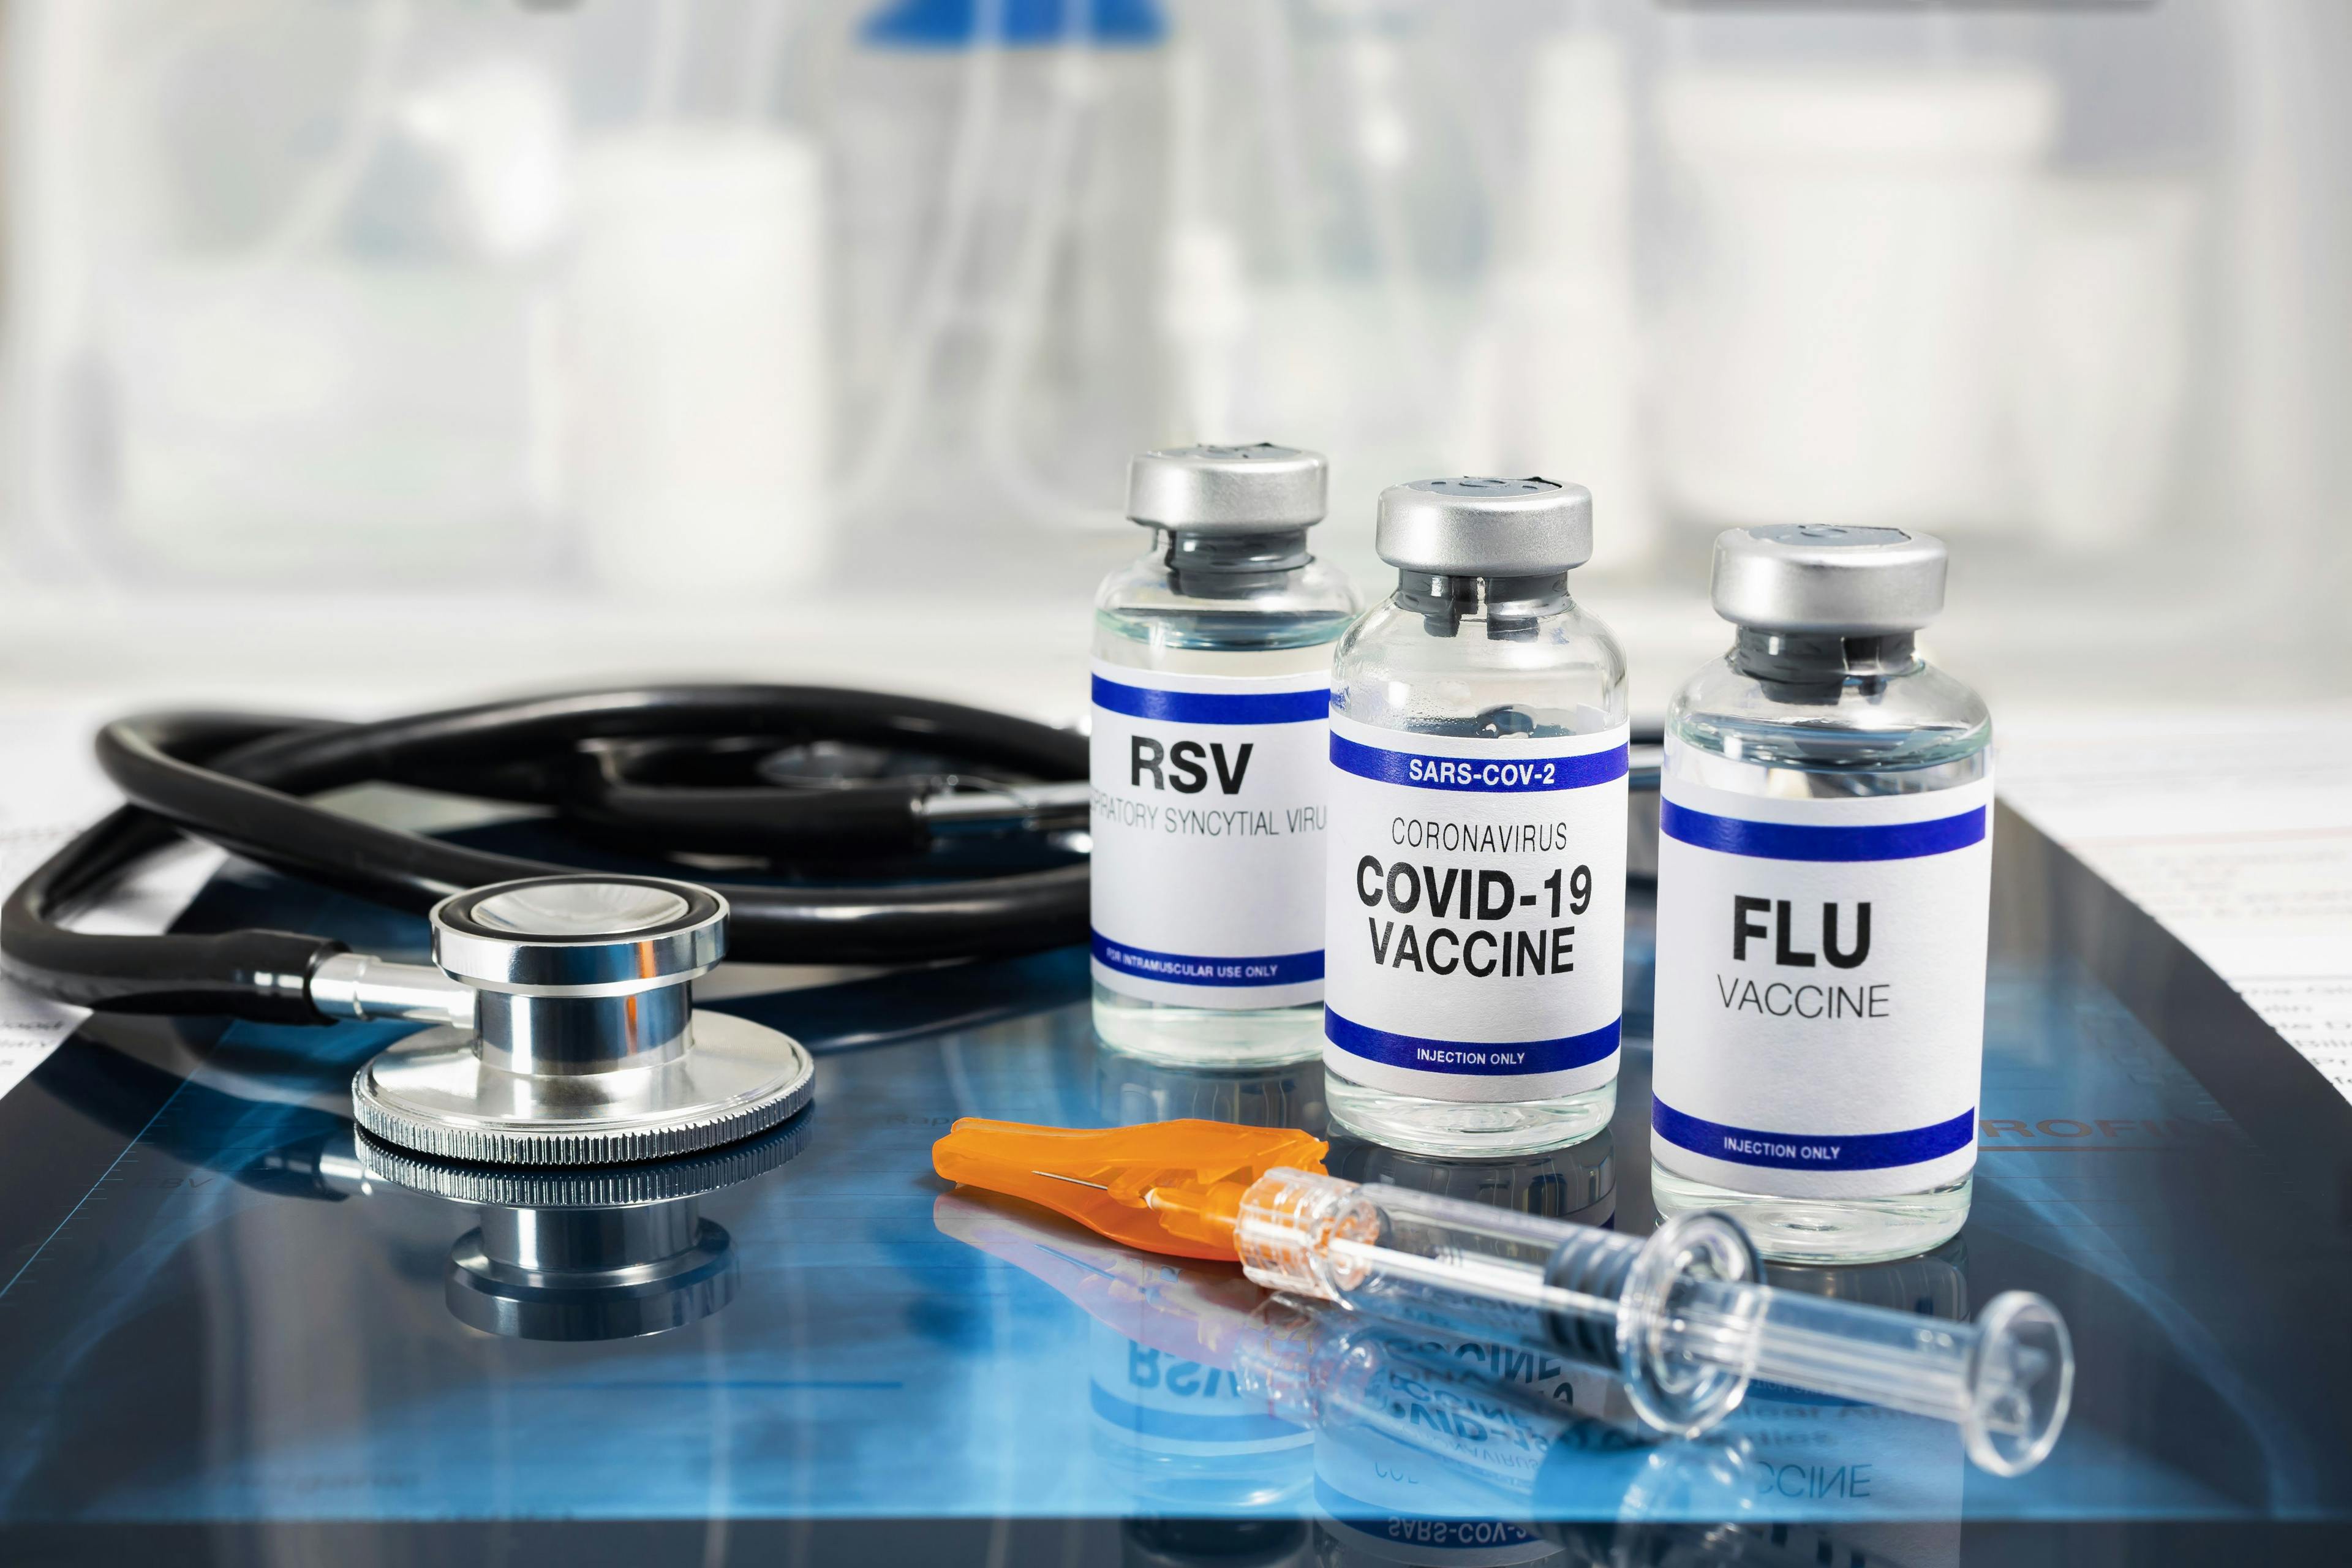 Bottles of vaccine for Influenza Virus, Respiratory Syncytial virus and Covid-19 for vaccination. Flu, RSV and Sars-cov-2 Coronavirus vaccine vials over Radiography pulmonar with stethoscope